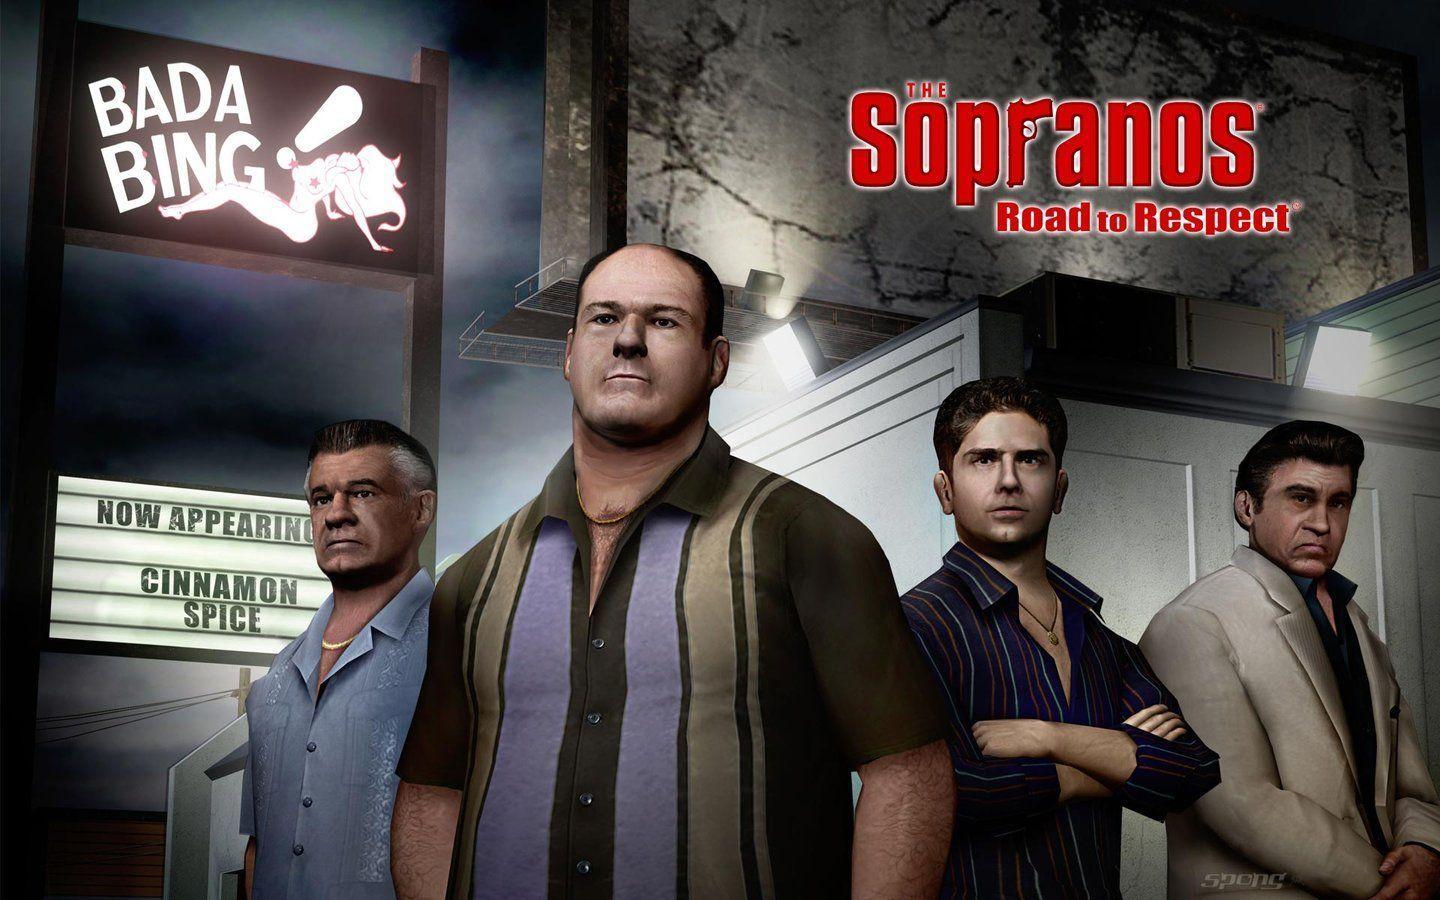 Wallpaper: The Sopranos: Road to Respect (1 of 2)